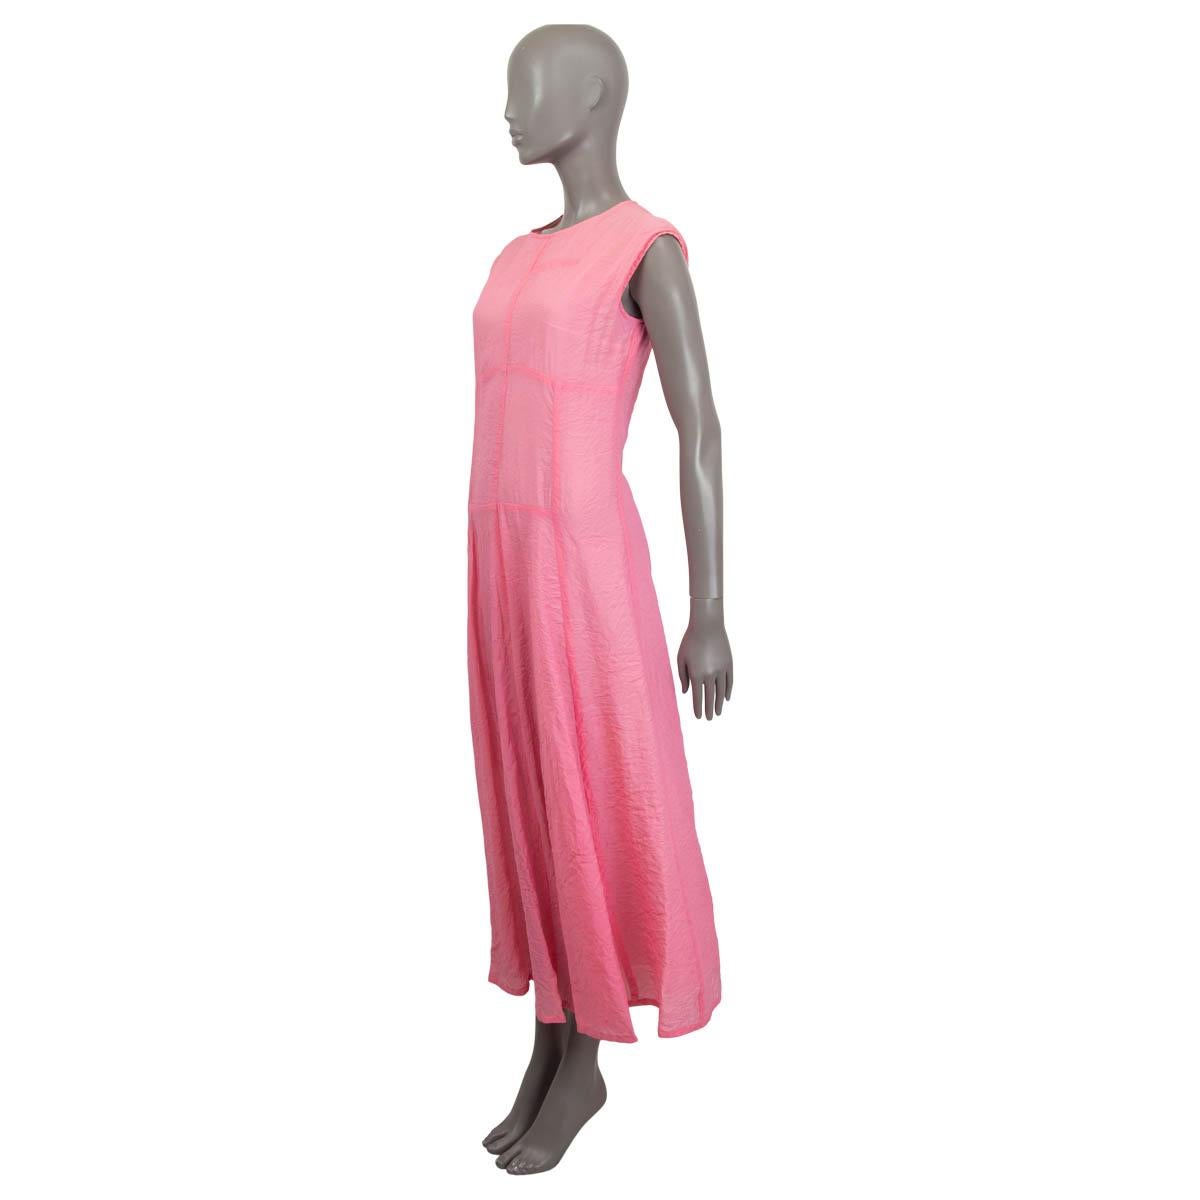 100% authentic Victoria Beckham sleeveless crinkled maxi dress in pink viscose (71%) and polyamide (29%). Opens with a concealed zipper and a hook at the back. Lined in off-white silk (90%) and elastane (10%). Has some faint deodorant stains on the